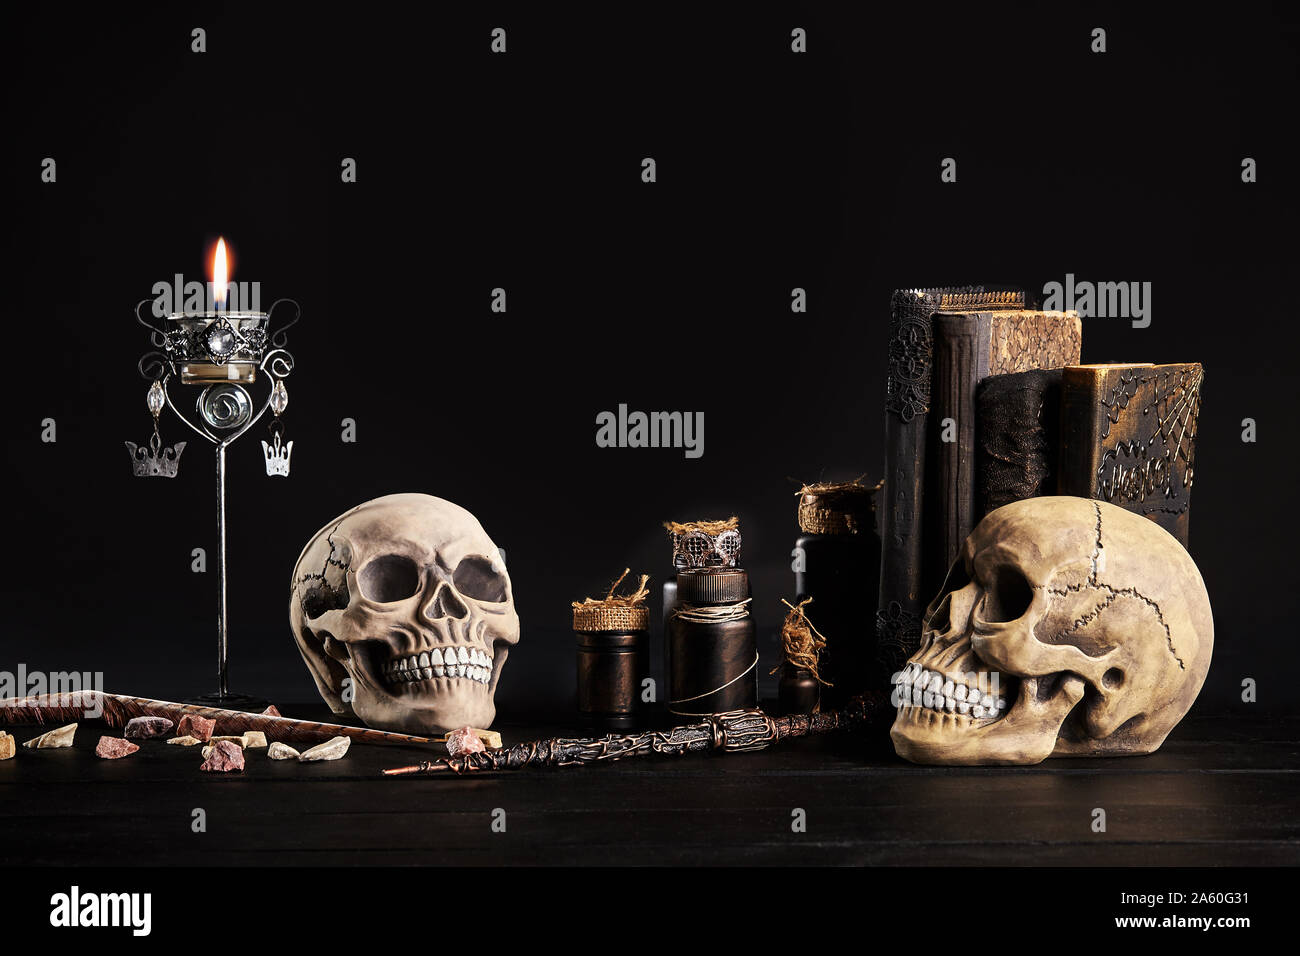 Realistic model of two human craniums with teeth, books with spells, jars of potion, burning candle in candlestick, little stones and a feather are on Stock Photo